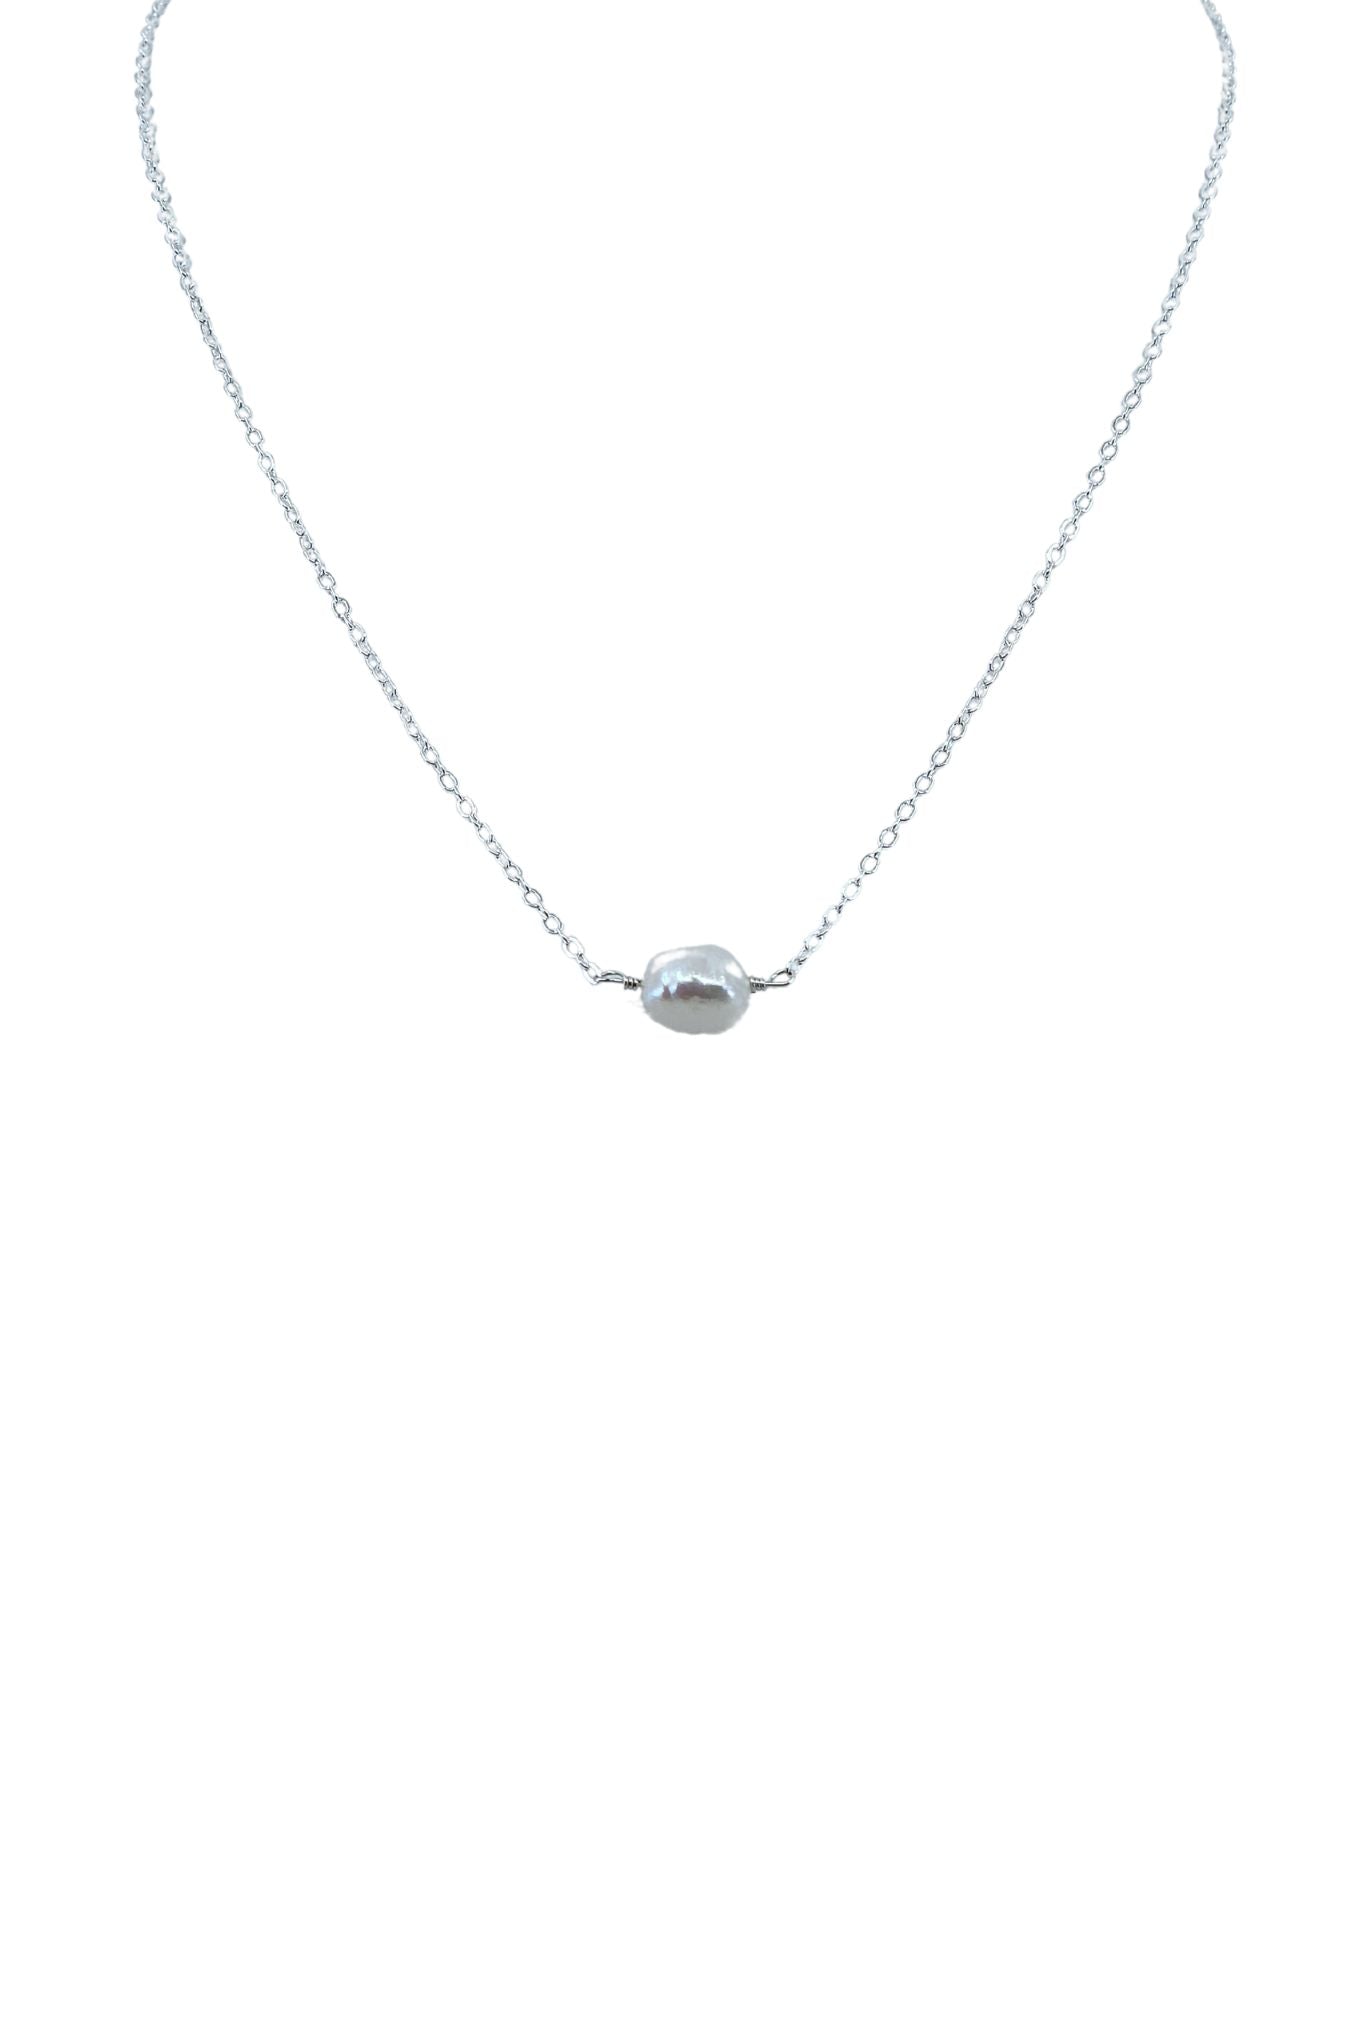 A Simple Pearl Necklace in Silver